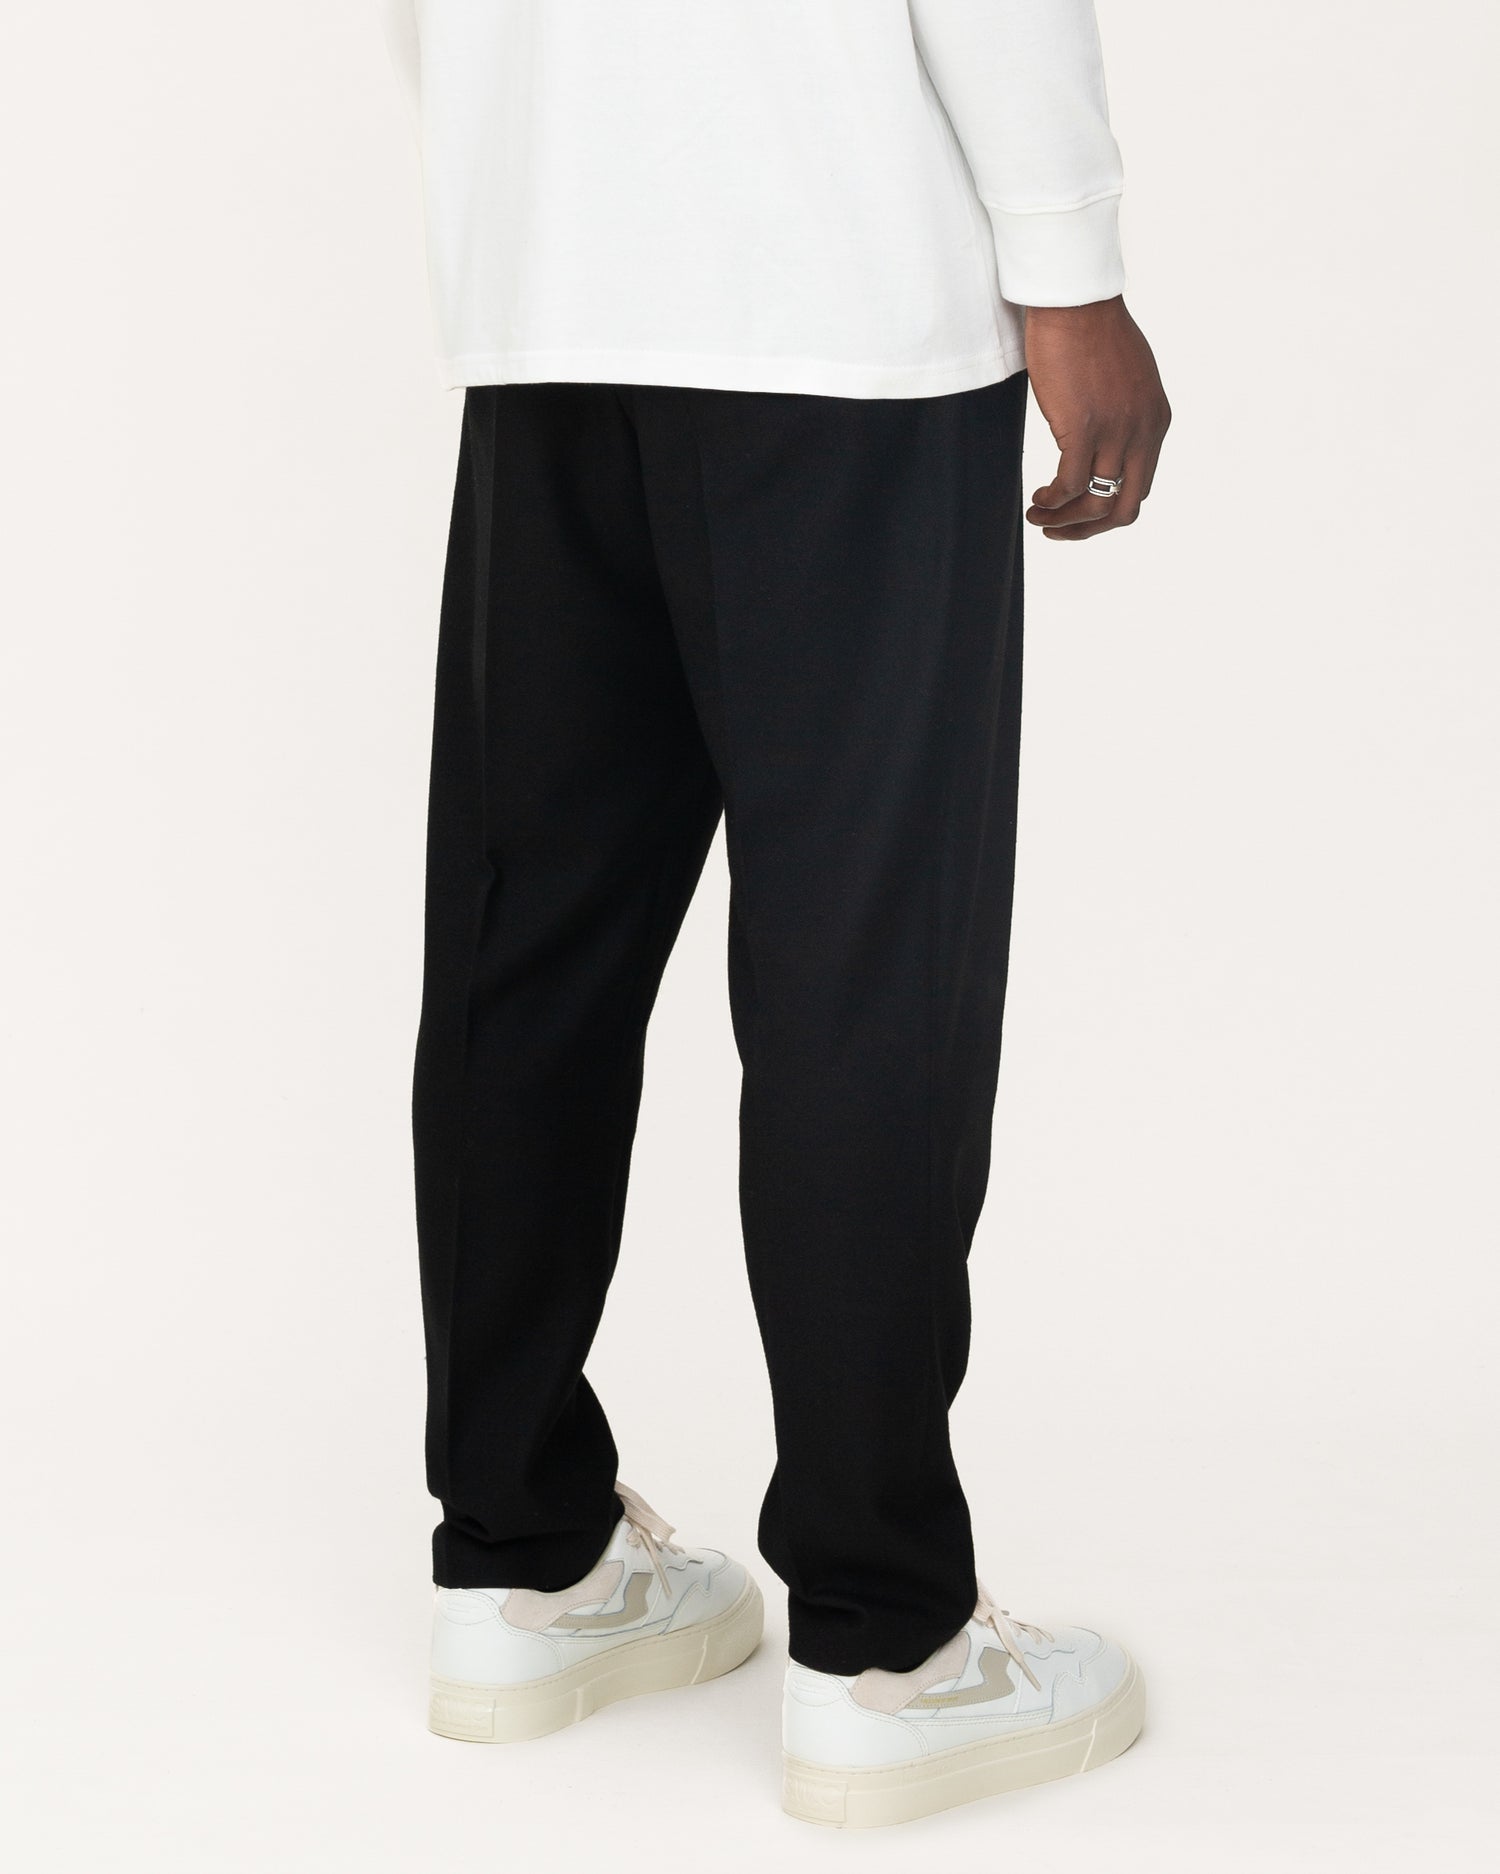 mens trousers, black trousers, angle side